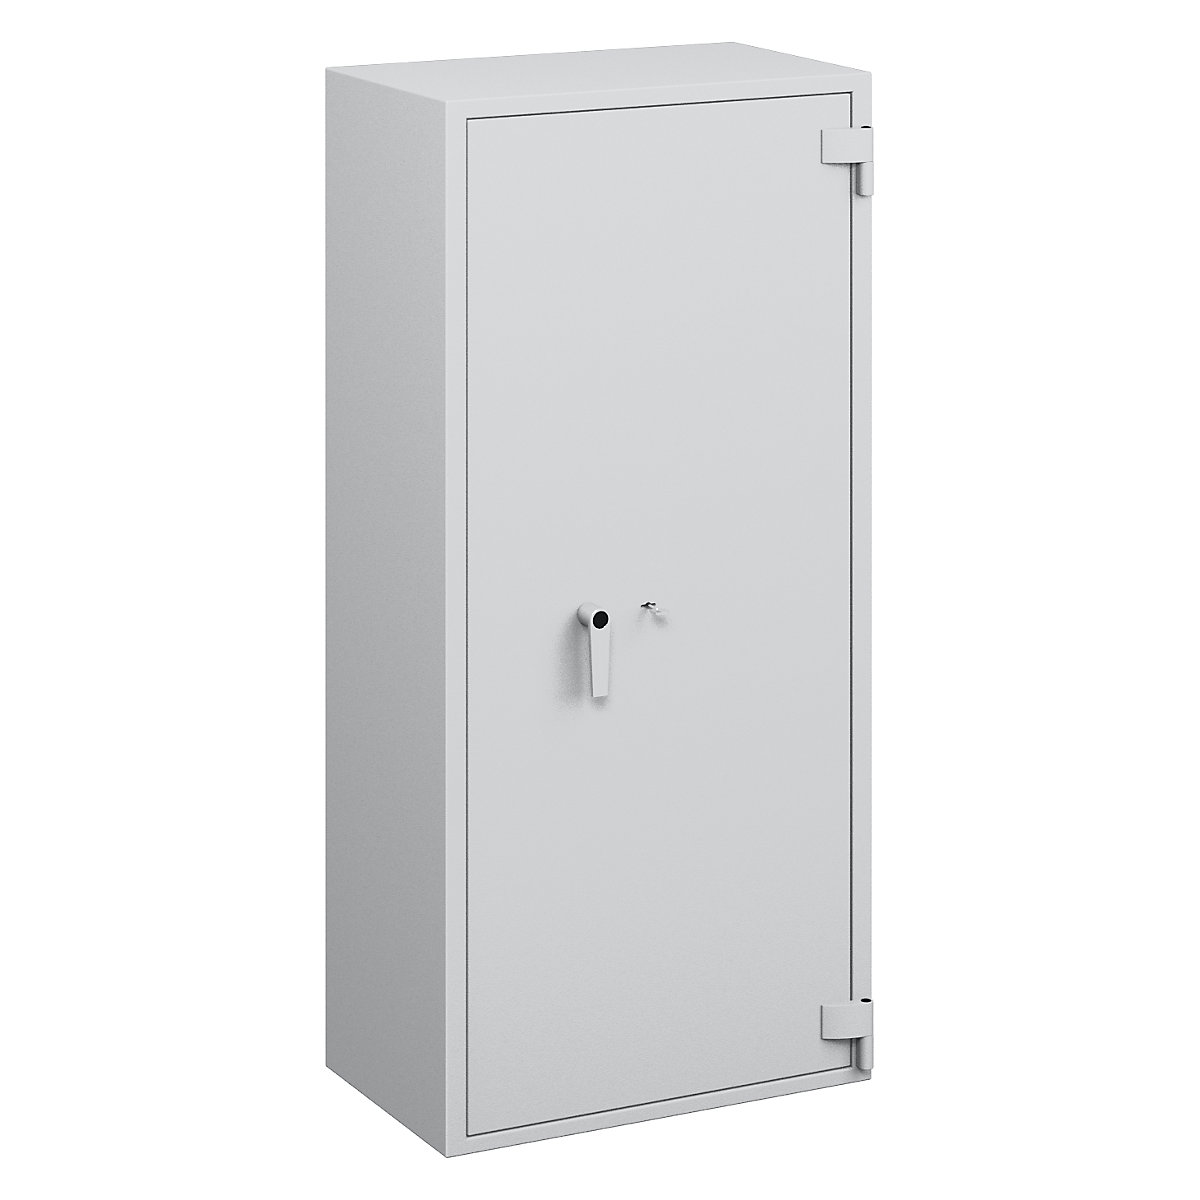 Fire resistant safety cabinet, VDMA B, S2, S 60 P, HxWxD 1507 x 704 x 471 mm-9